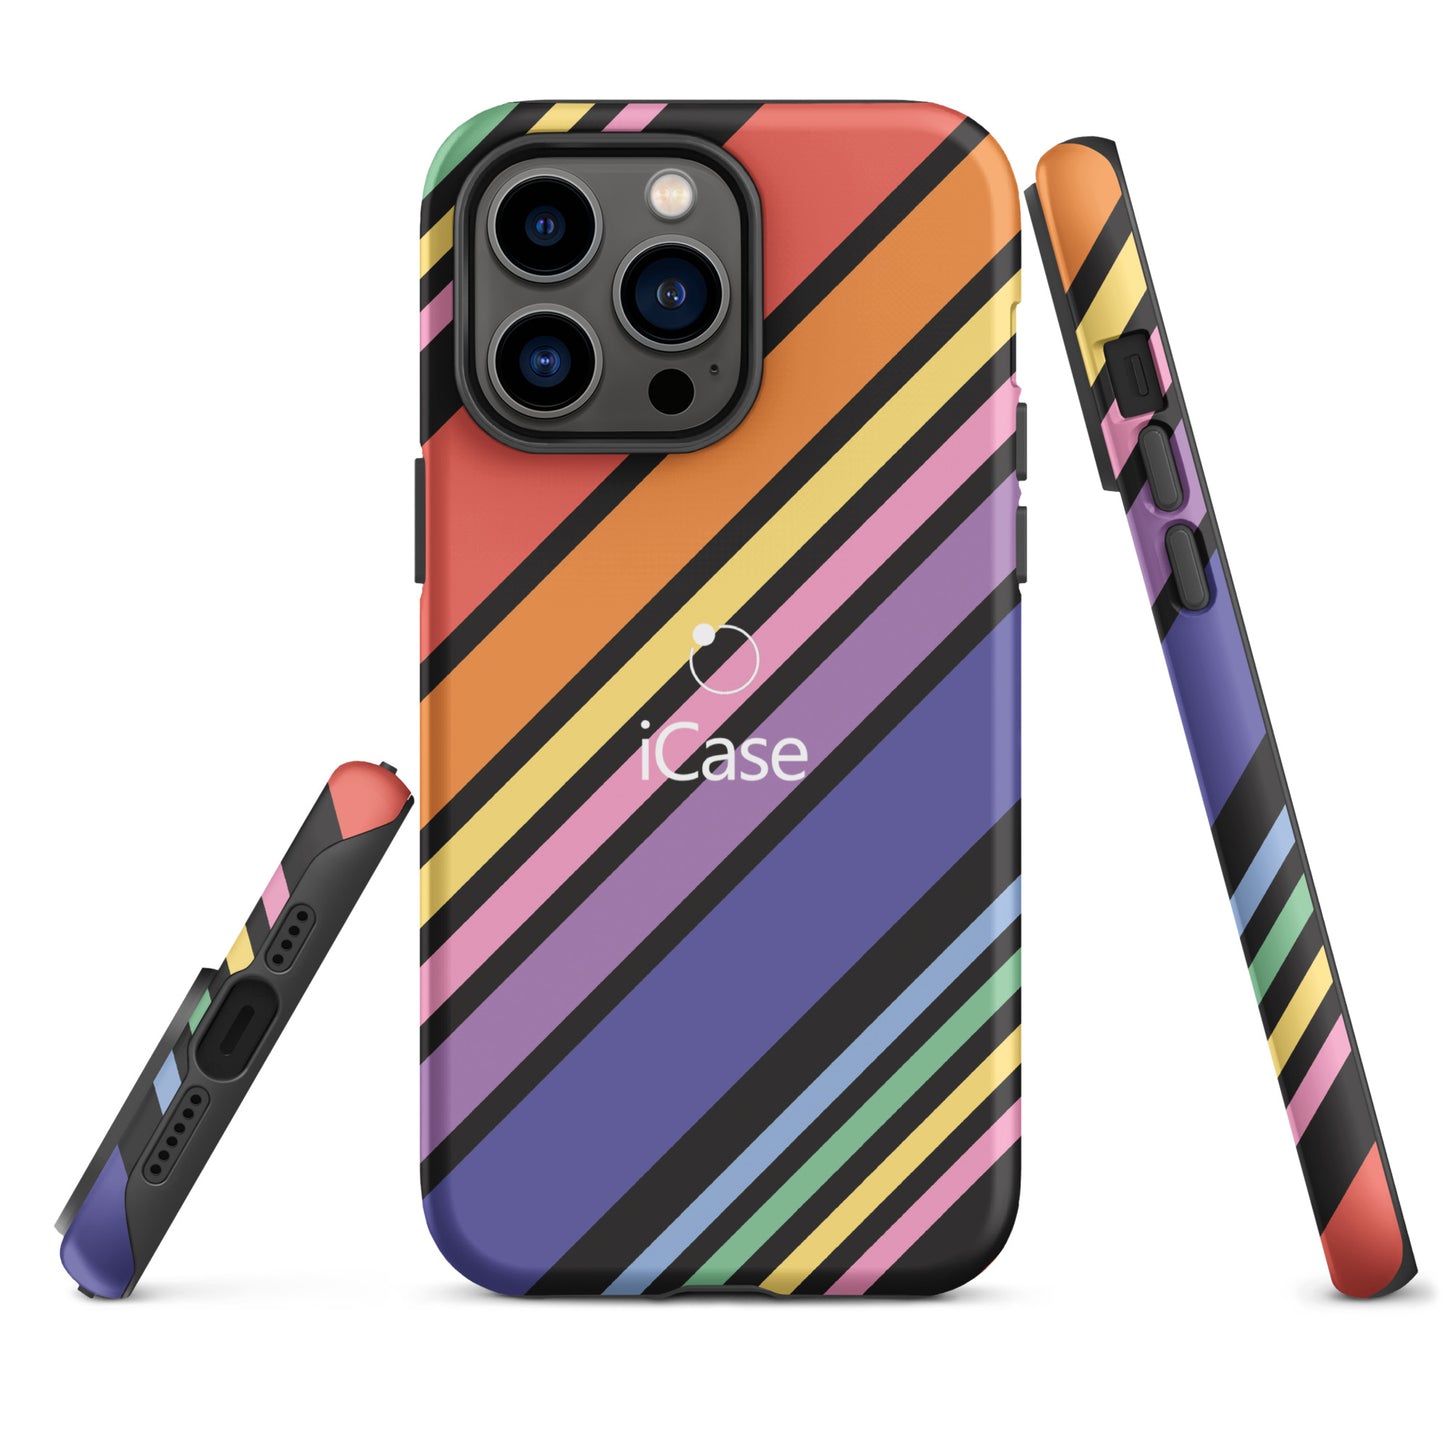 iCase Couleurs HardCase Coque pour iPhone